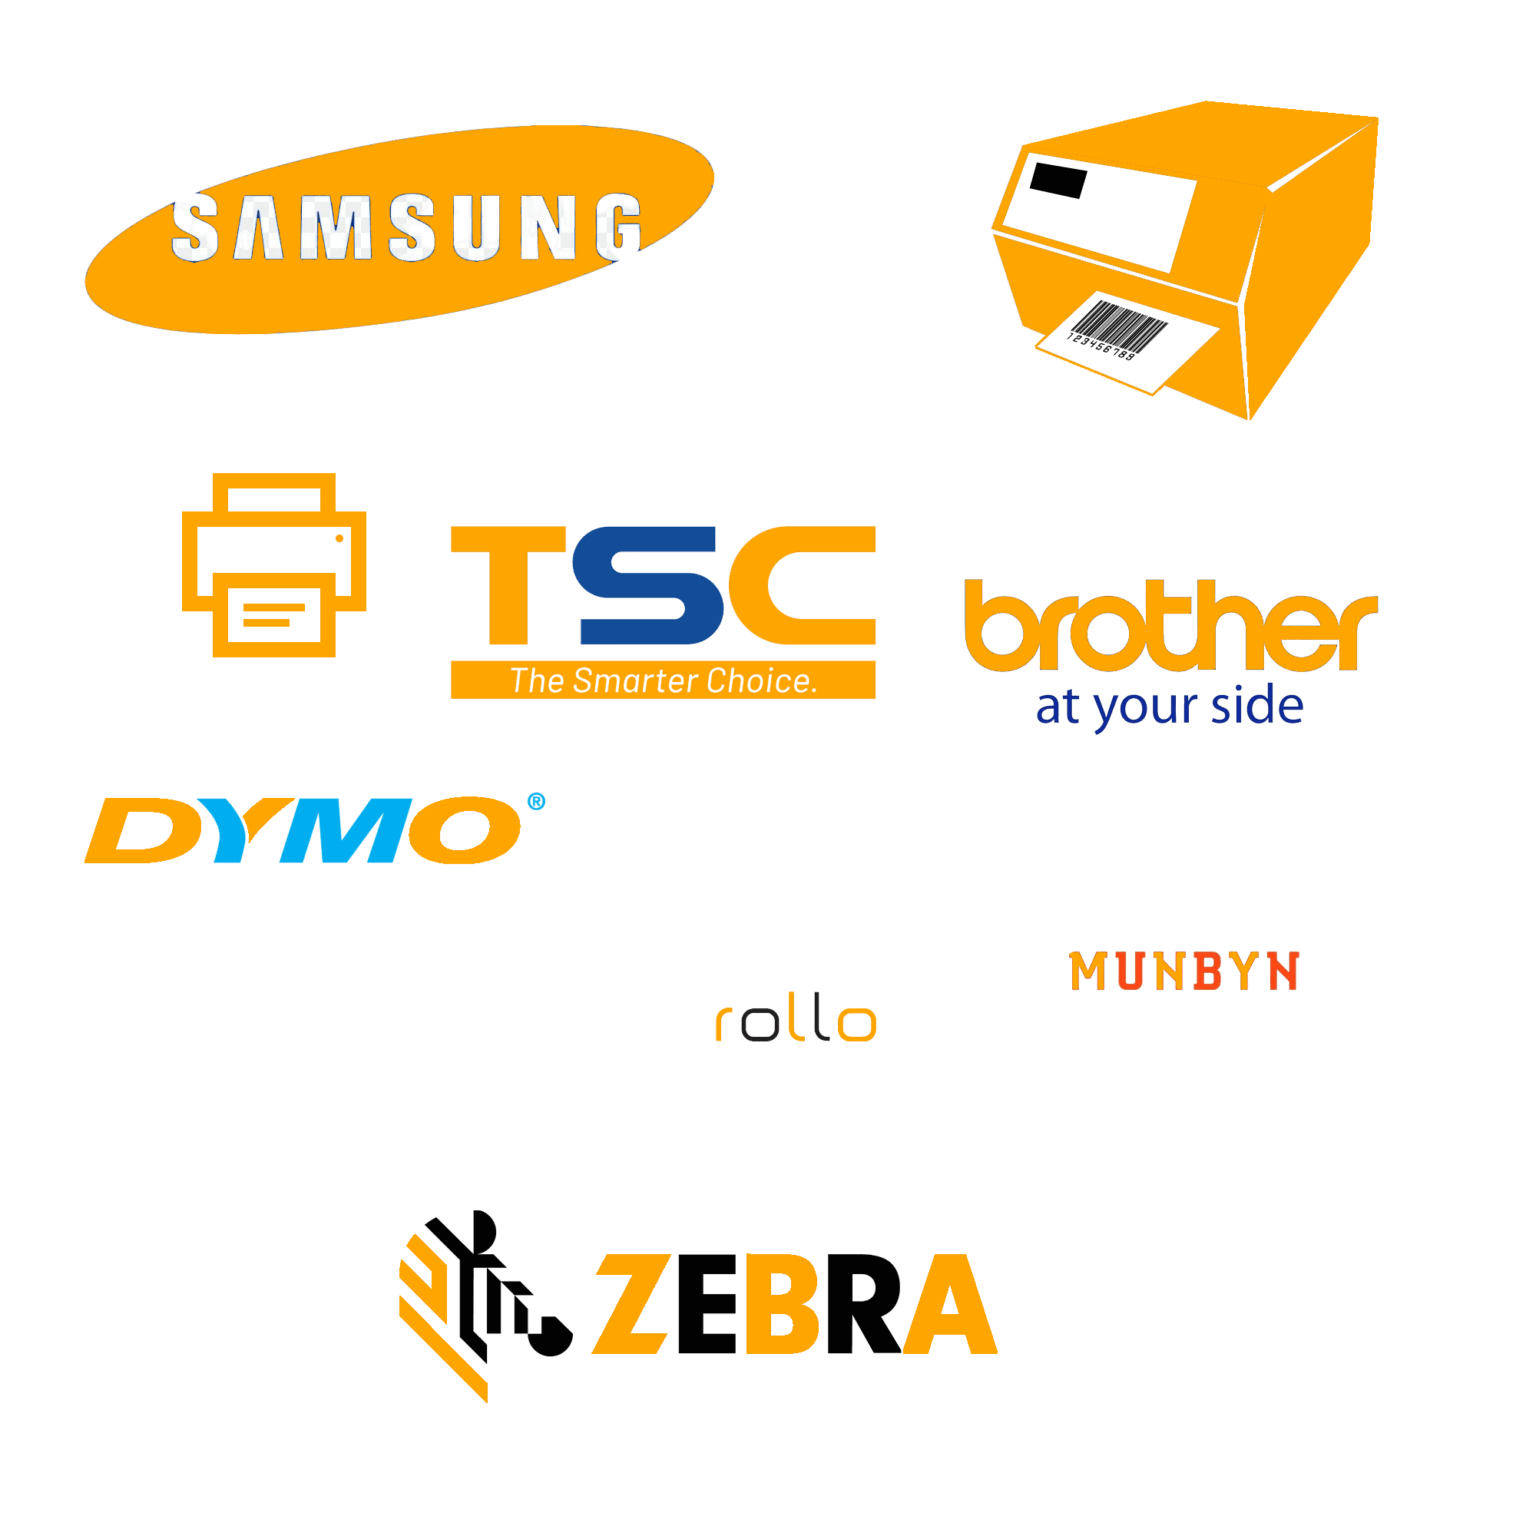 An image of printer brands